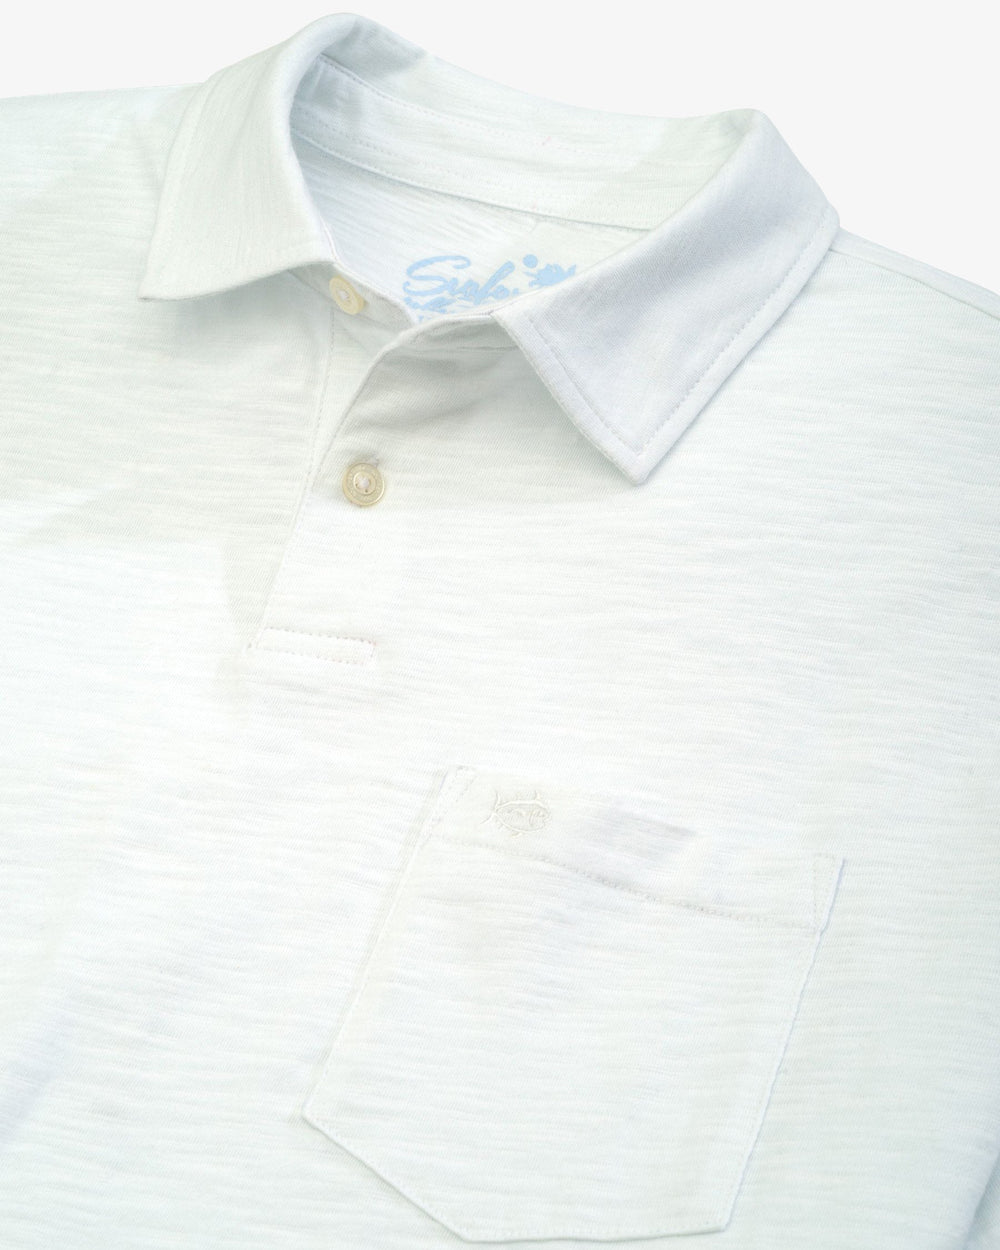 The back of the Men's Sun Farer Polo Shirt by Southern Tide - Classic White